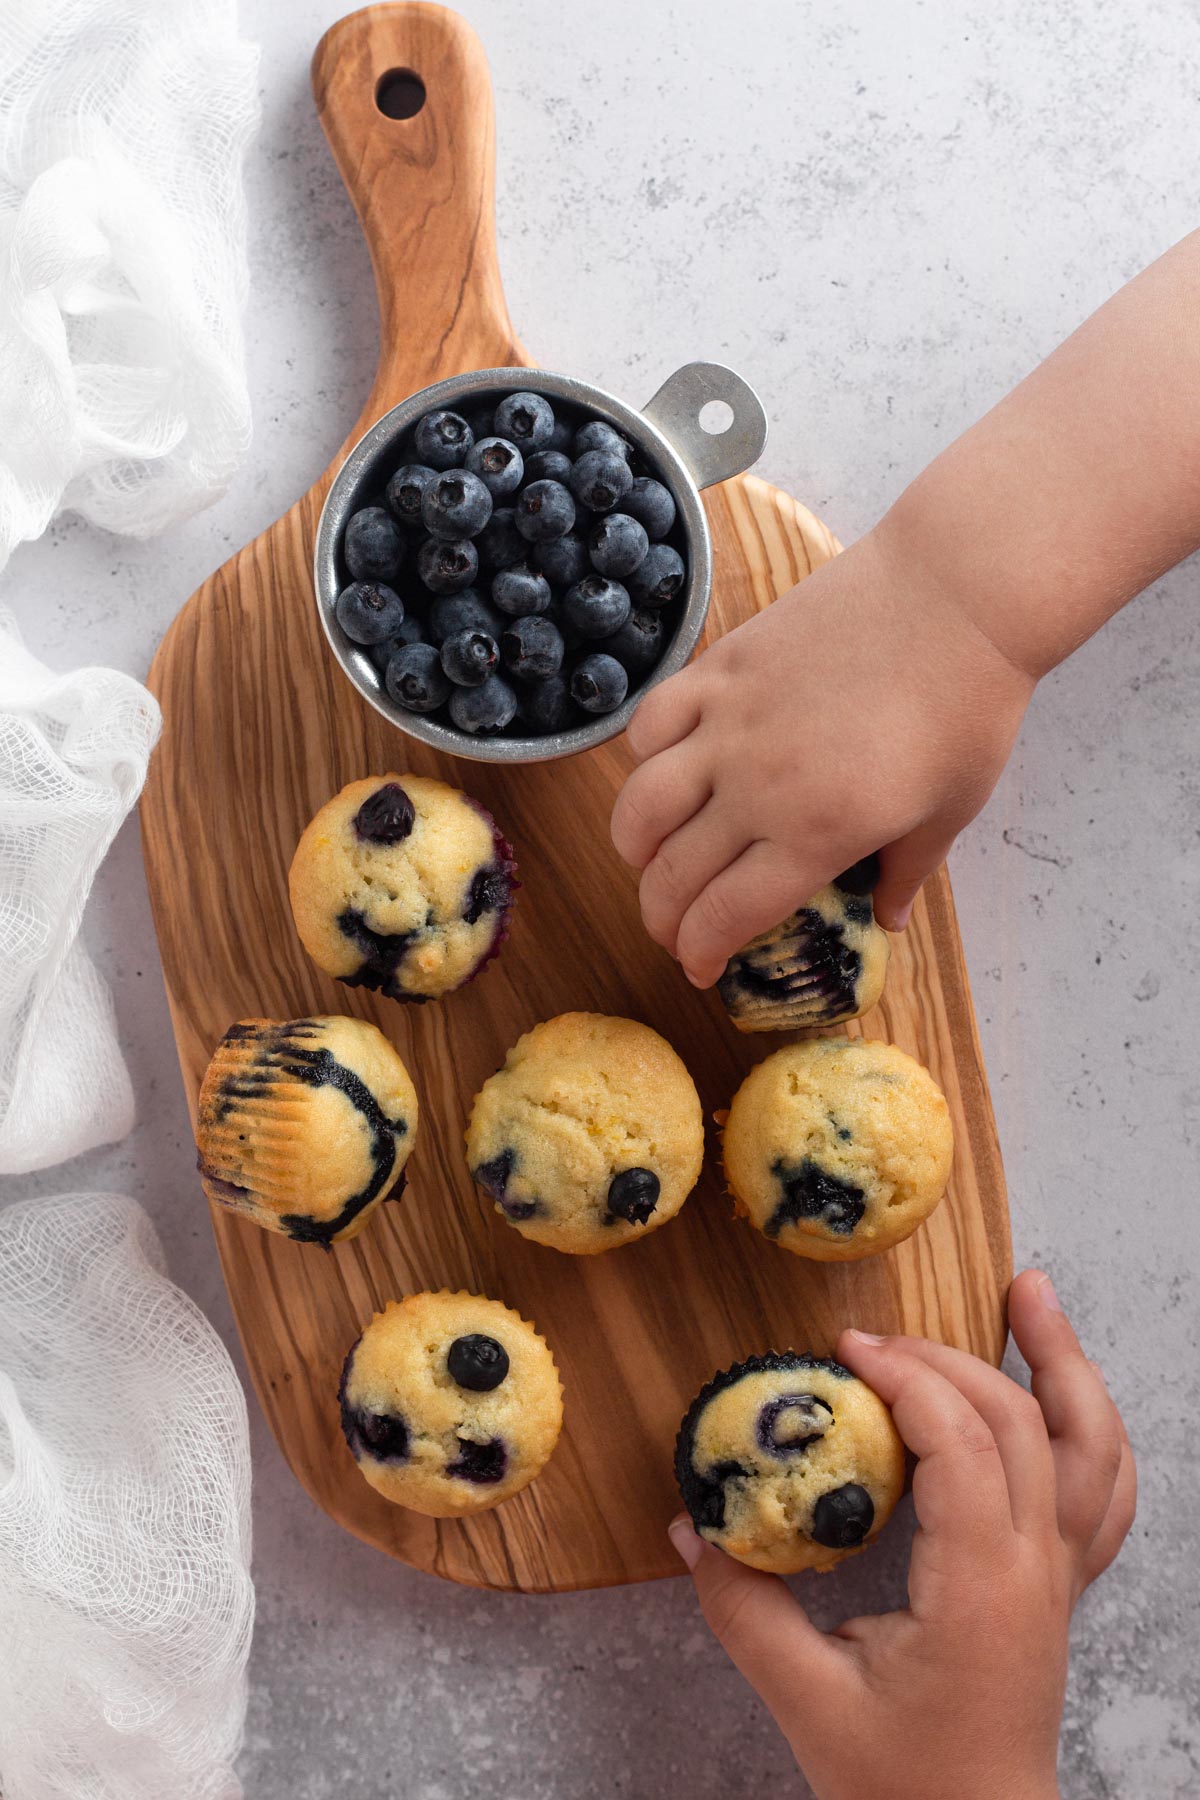 Toddler hands grabbing mini muffins from a wooden cutting board.